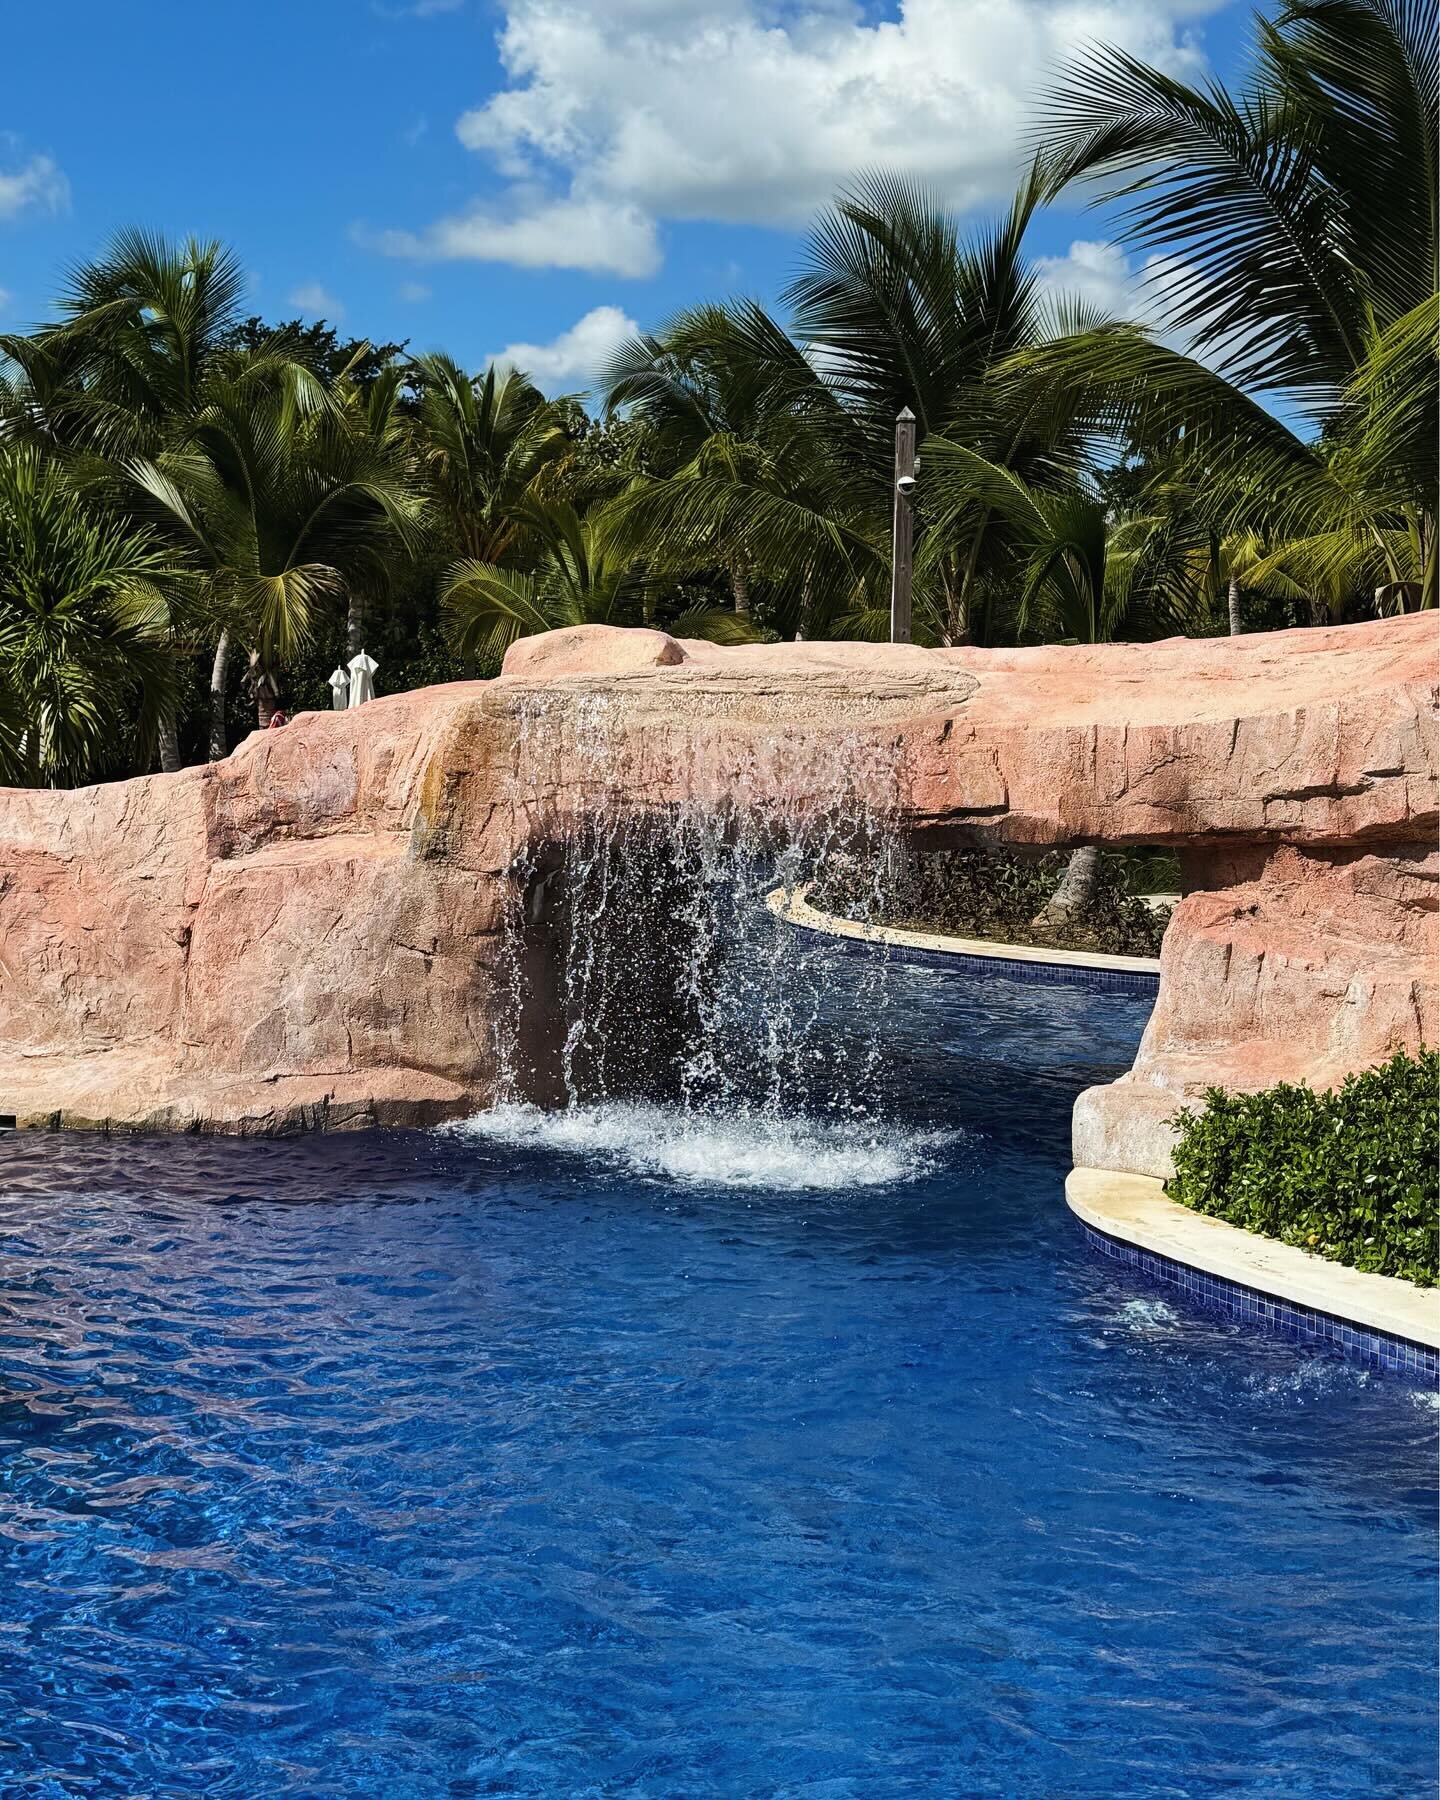 Happy Friday, everyone! A few things we love:

🏊 A lazy river
🚿 A water feature
🍹A Pina Colada

And you can get all of that &amp; more at an all-inclusive resort! 

#LazyRiver #Cocktails #Waterfall #CaribbeanTravel #AllInclusive